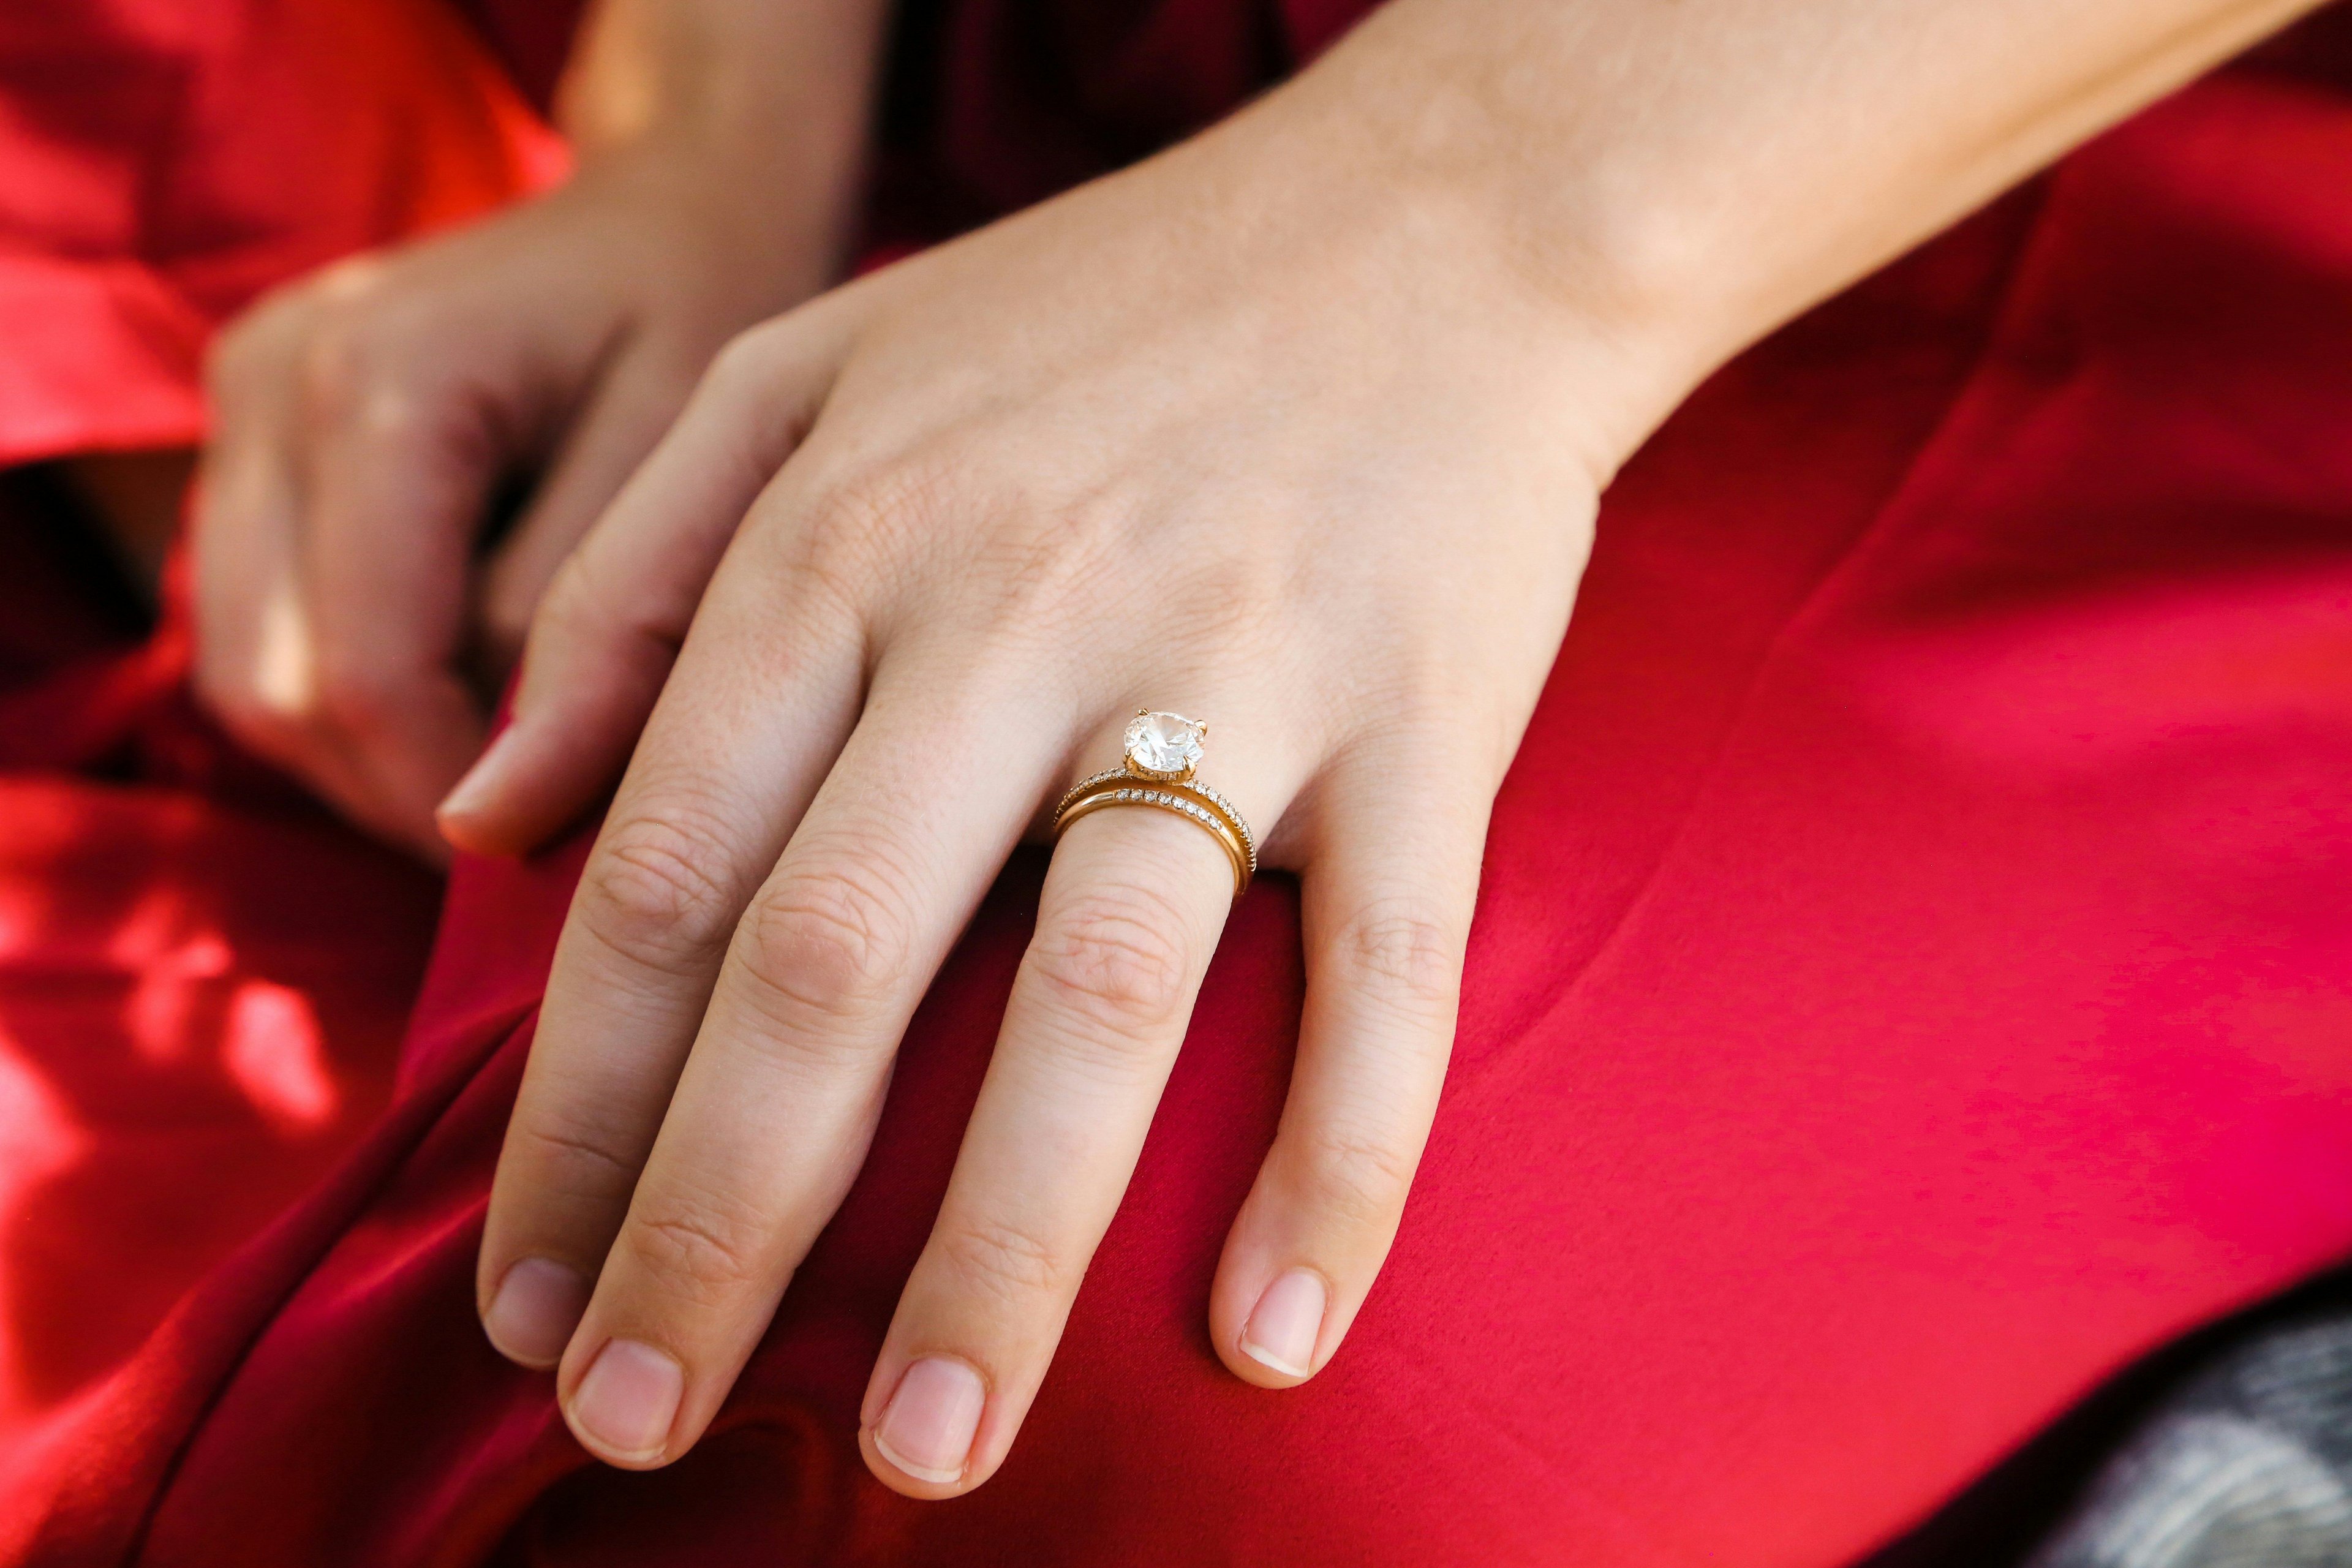 Your Love, Your Design: The Personal Touch In Wedding Rings